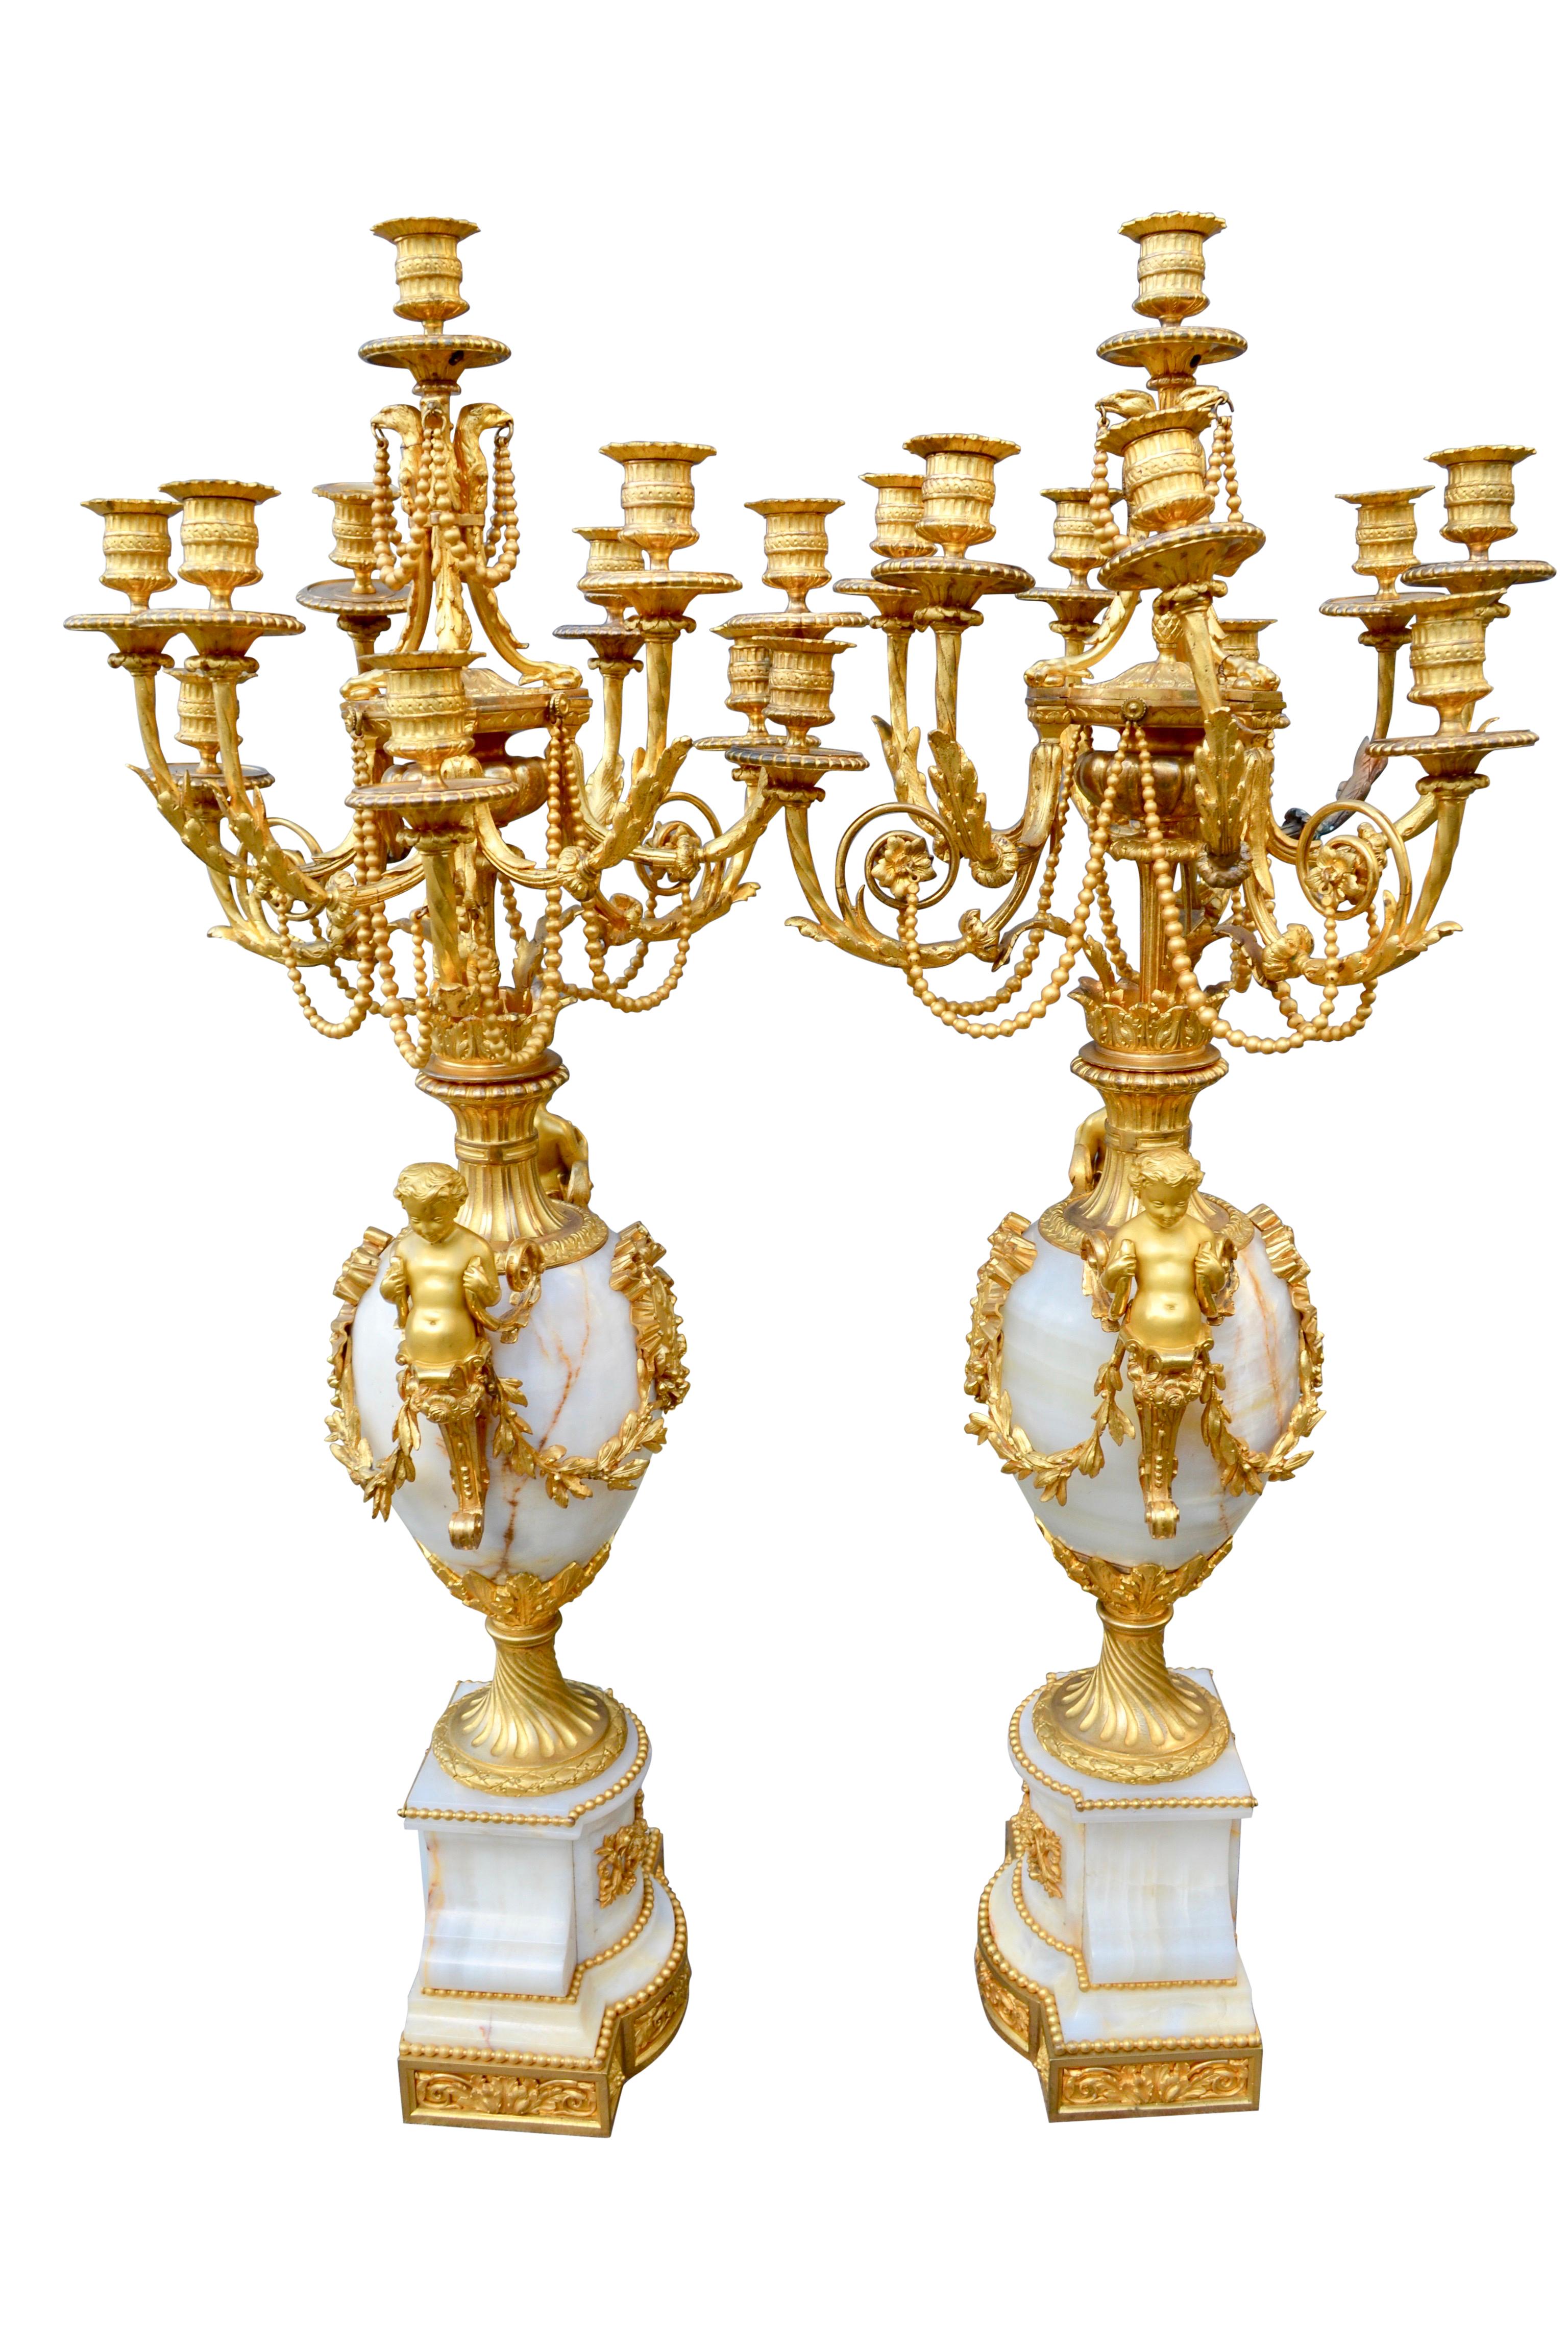 Palatial Scale Onyx and Gilt Bronze Napoleon III Candelabra In Good Condition For Sale In Vancouver, British Columbia